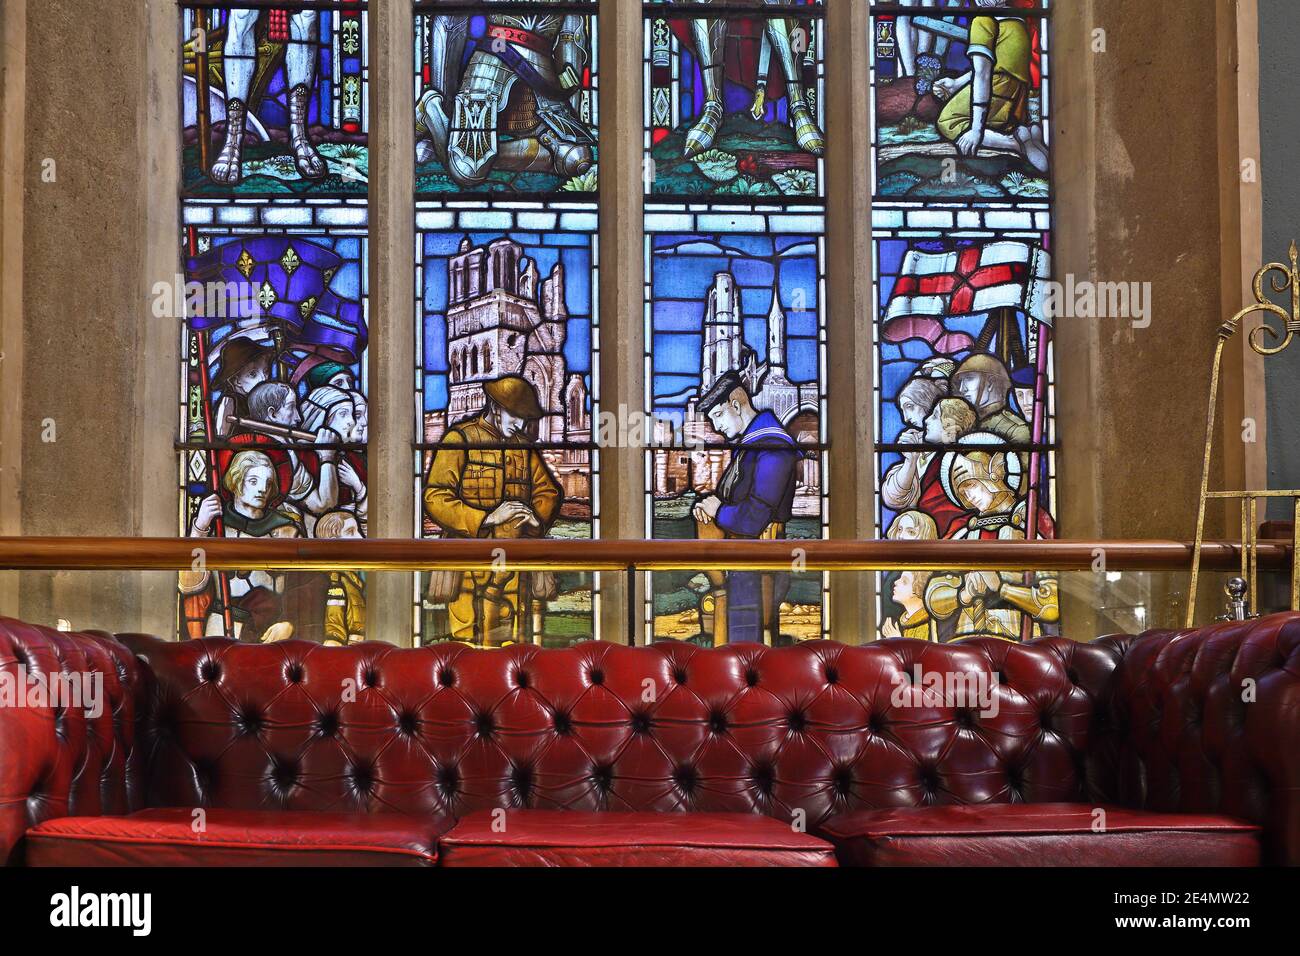 Stained glass with images of the British military history, as seen in an old church in Nottingham, England, nowadays a bar. Stock Photo